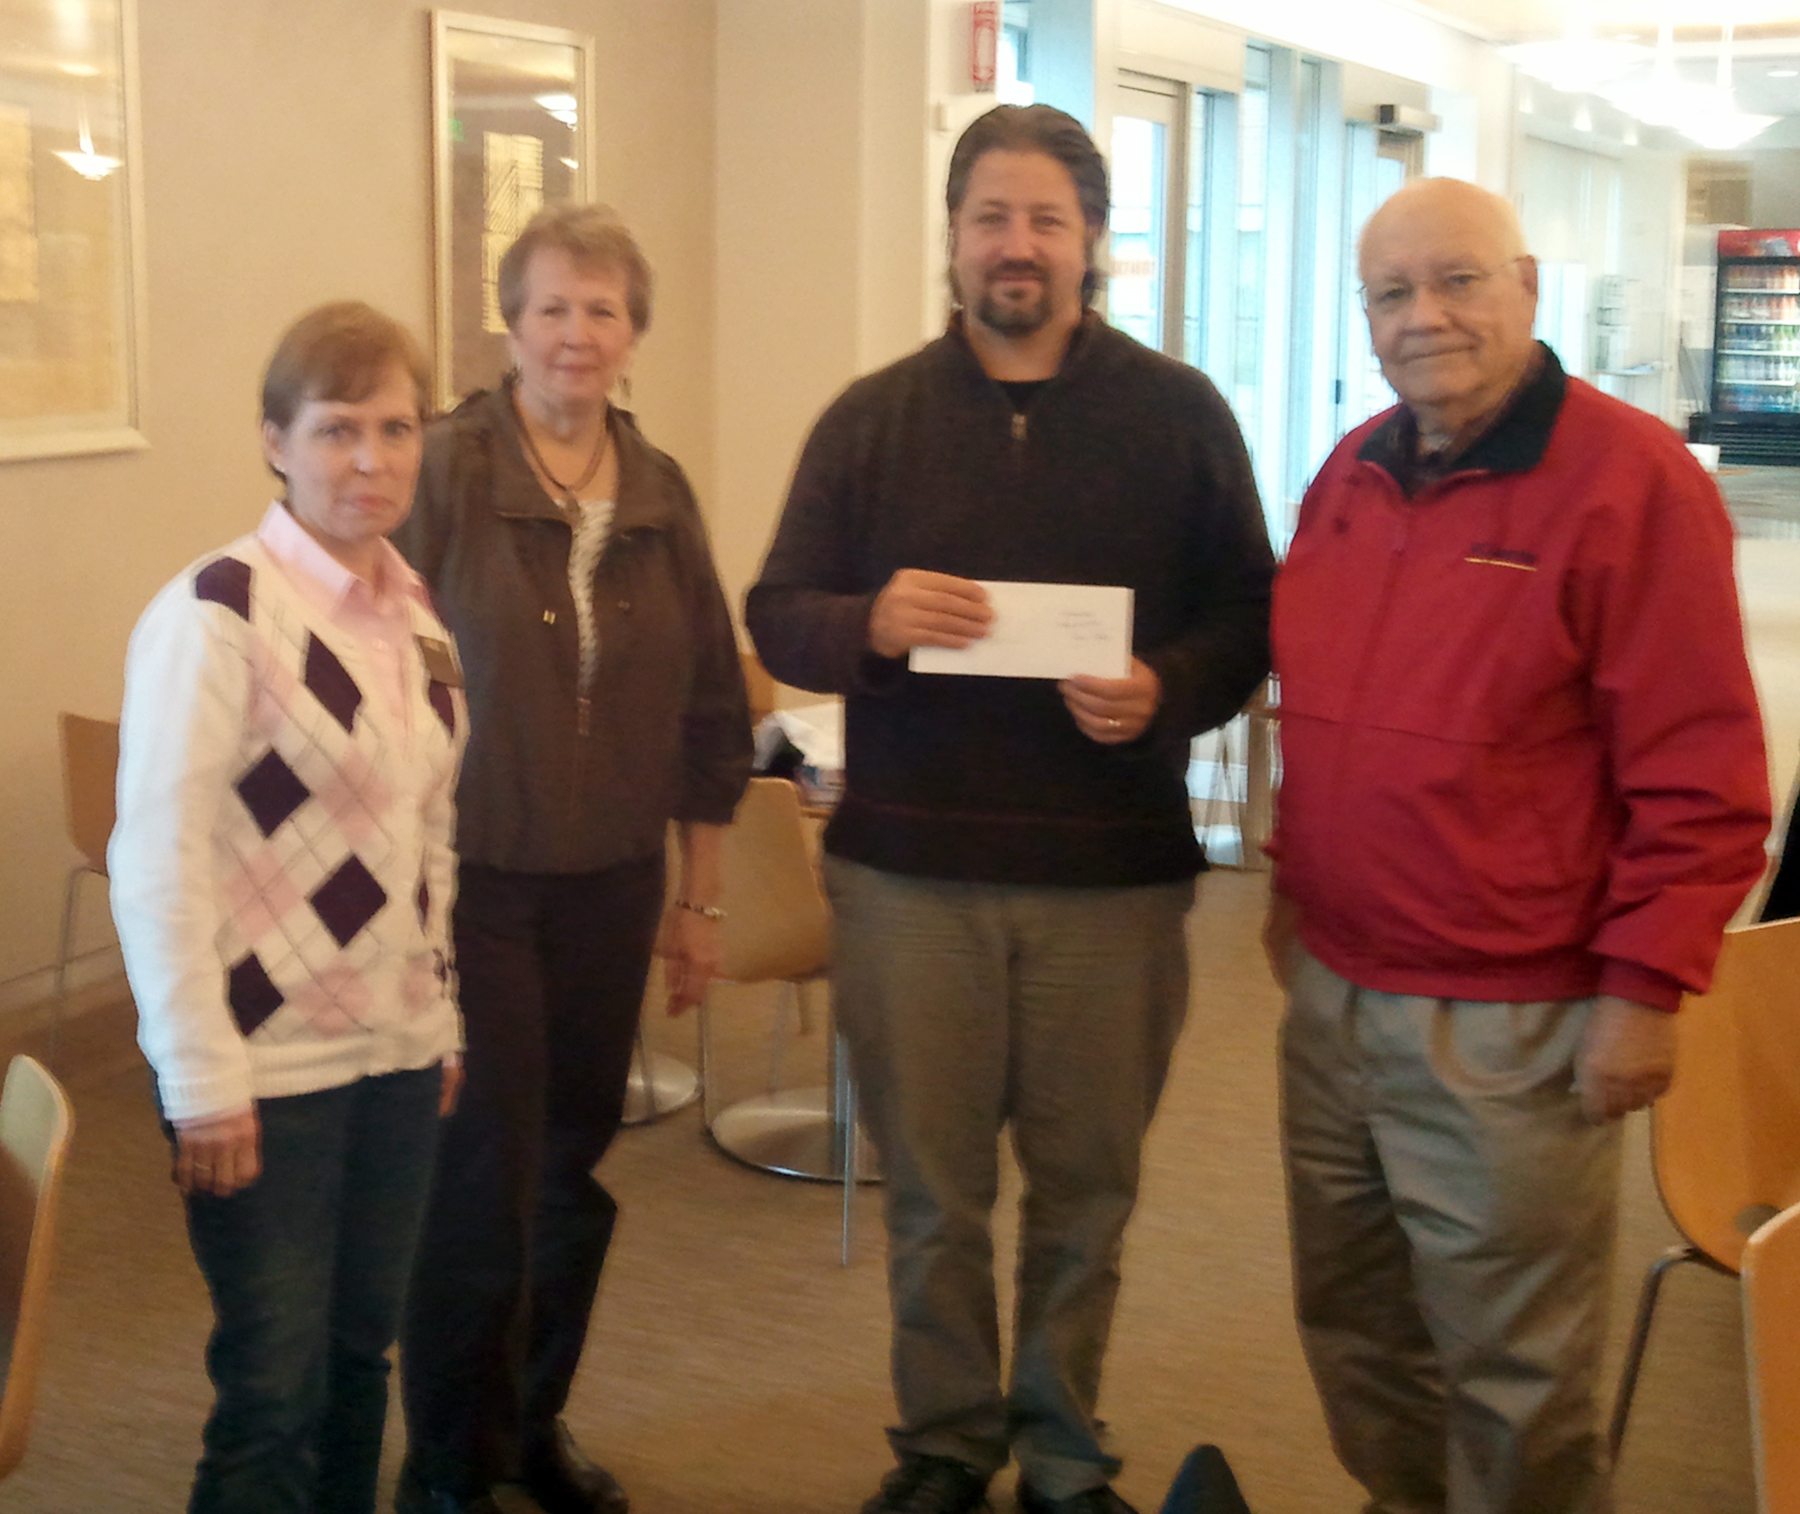 Glenwood: Winter Hospitality Overflow concert organizer Nancy Deibert, second from left, presents WHO coordinator Kevin Hiebert with a check for more than $9,400 as Darrell Brandenberg, right, and Peggy Kain look on.